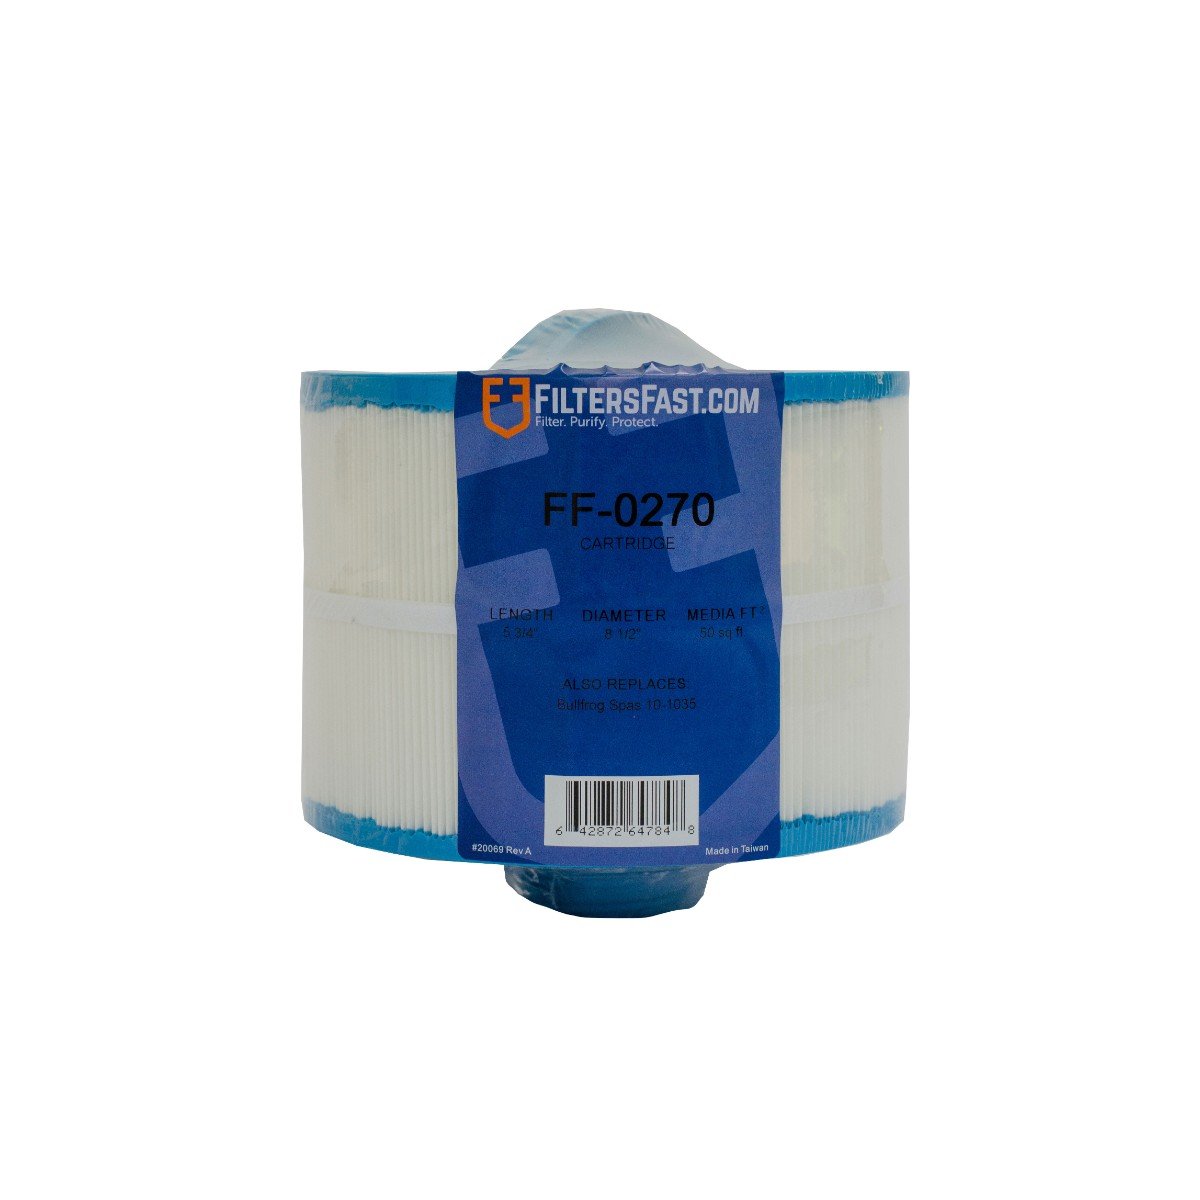 Filters Fast&reg; FF-0270 Replacement For Bullfrog Spas 10-1035